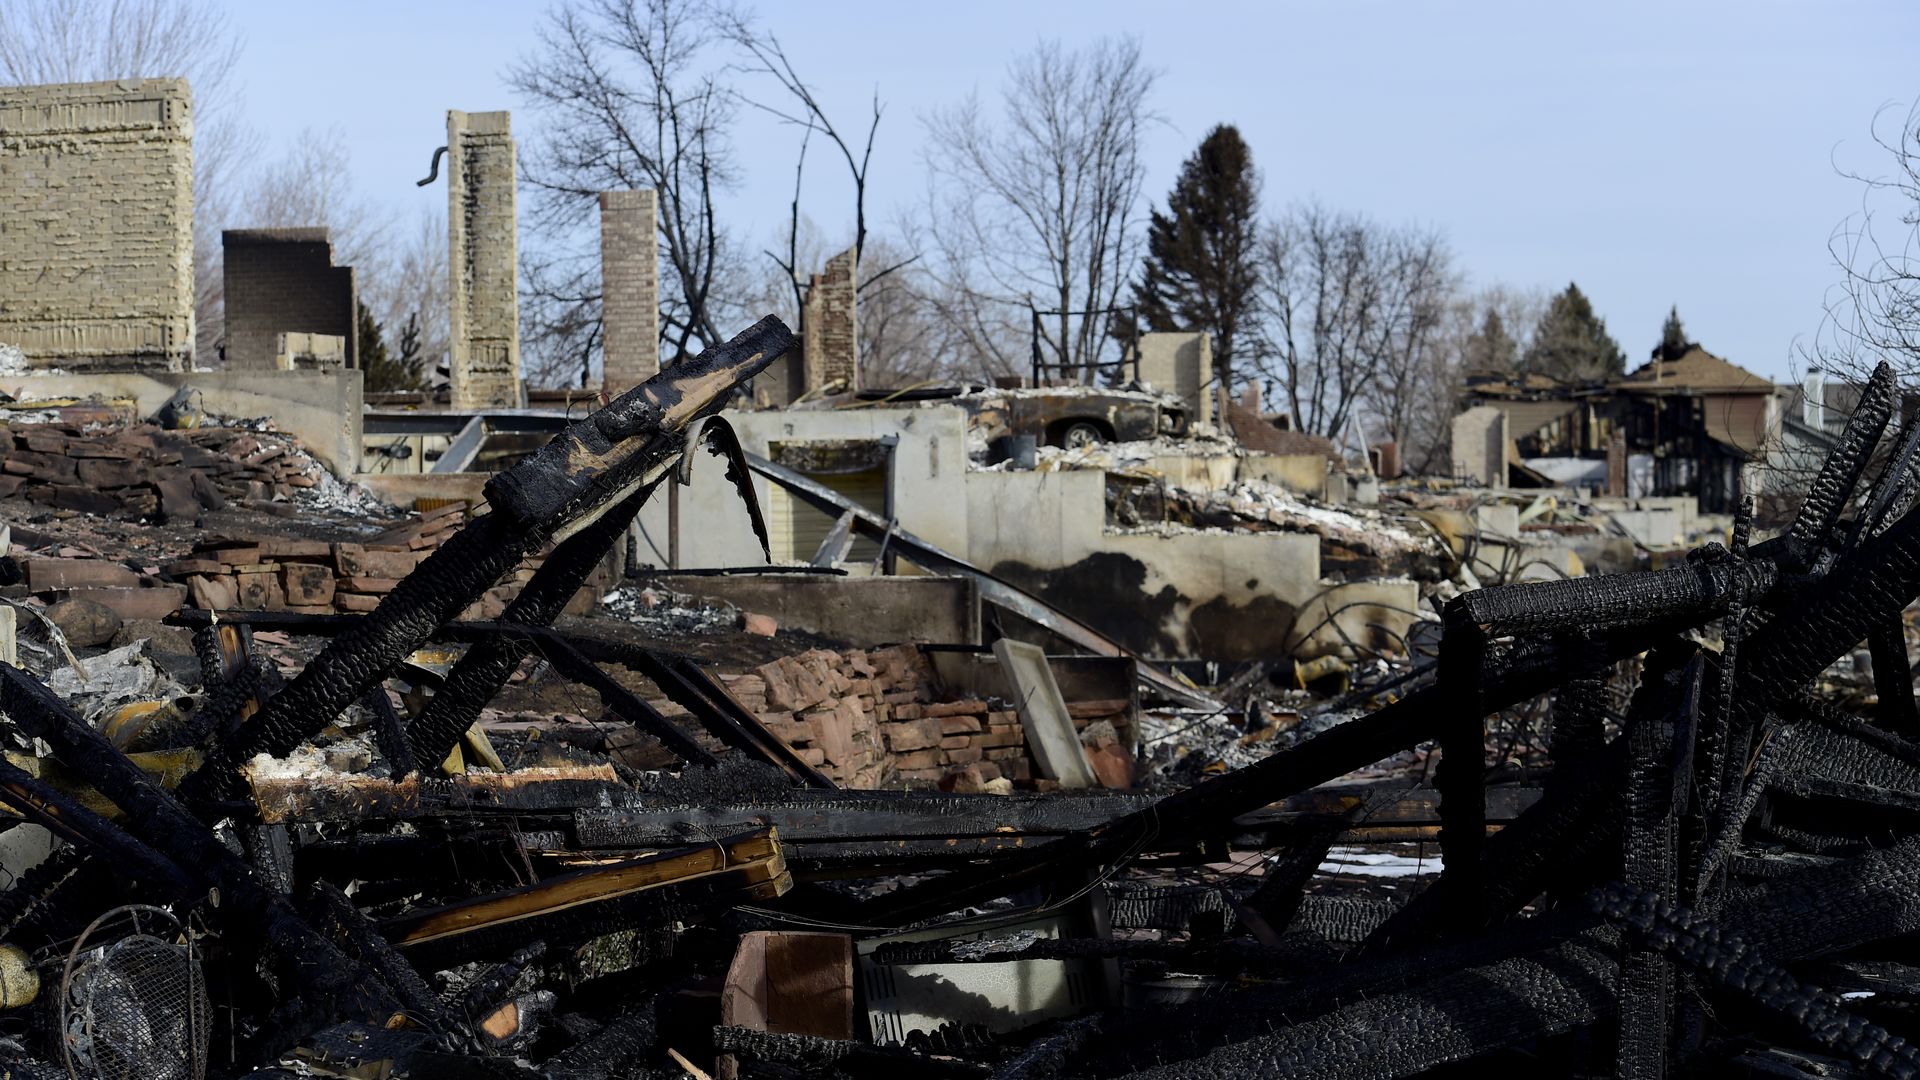  Homes destroyed by the Marshall Fire  in Superior. Photo: Matthew Jonas/Boulder Daily Camera via Getty Images